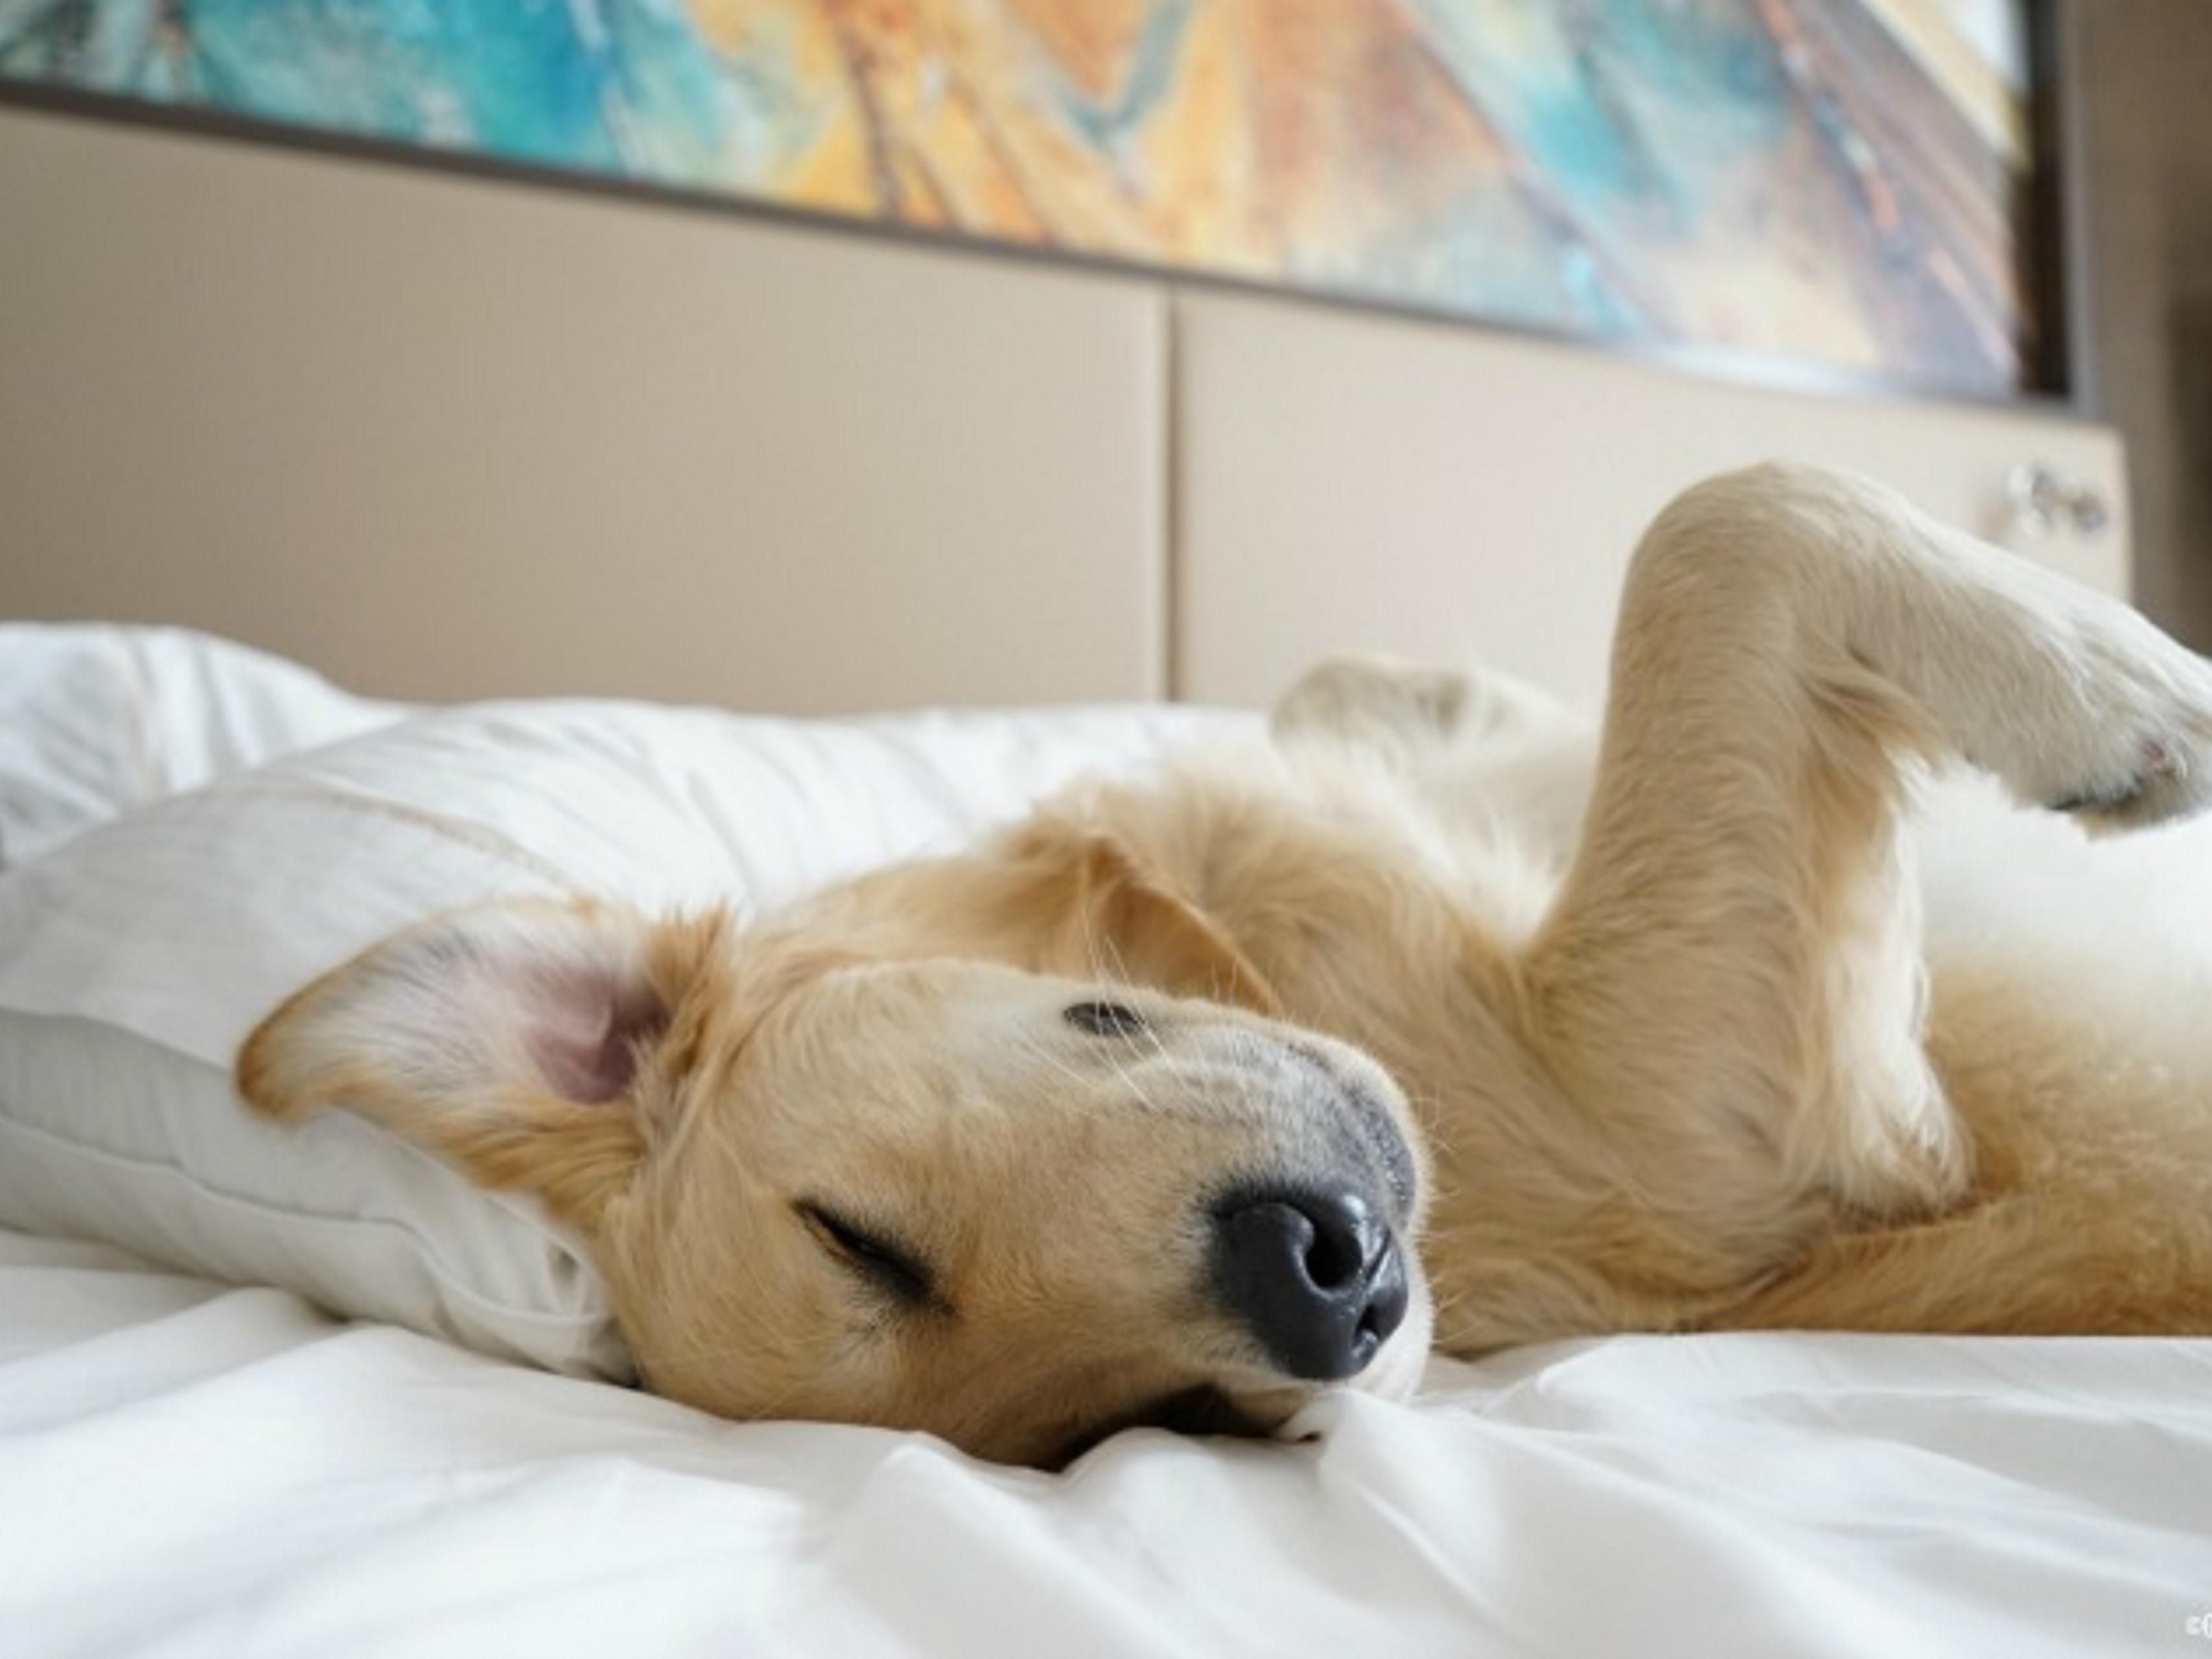 Traveling with Fido or another furry friend? We are a pet-friendly hotel with a great outside walking area. $40 daily fee applies per pet (max 2 pets allowed).